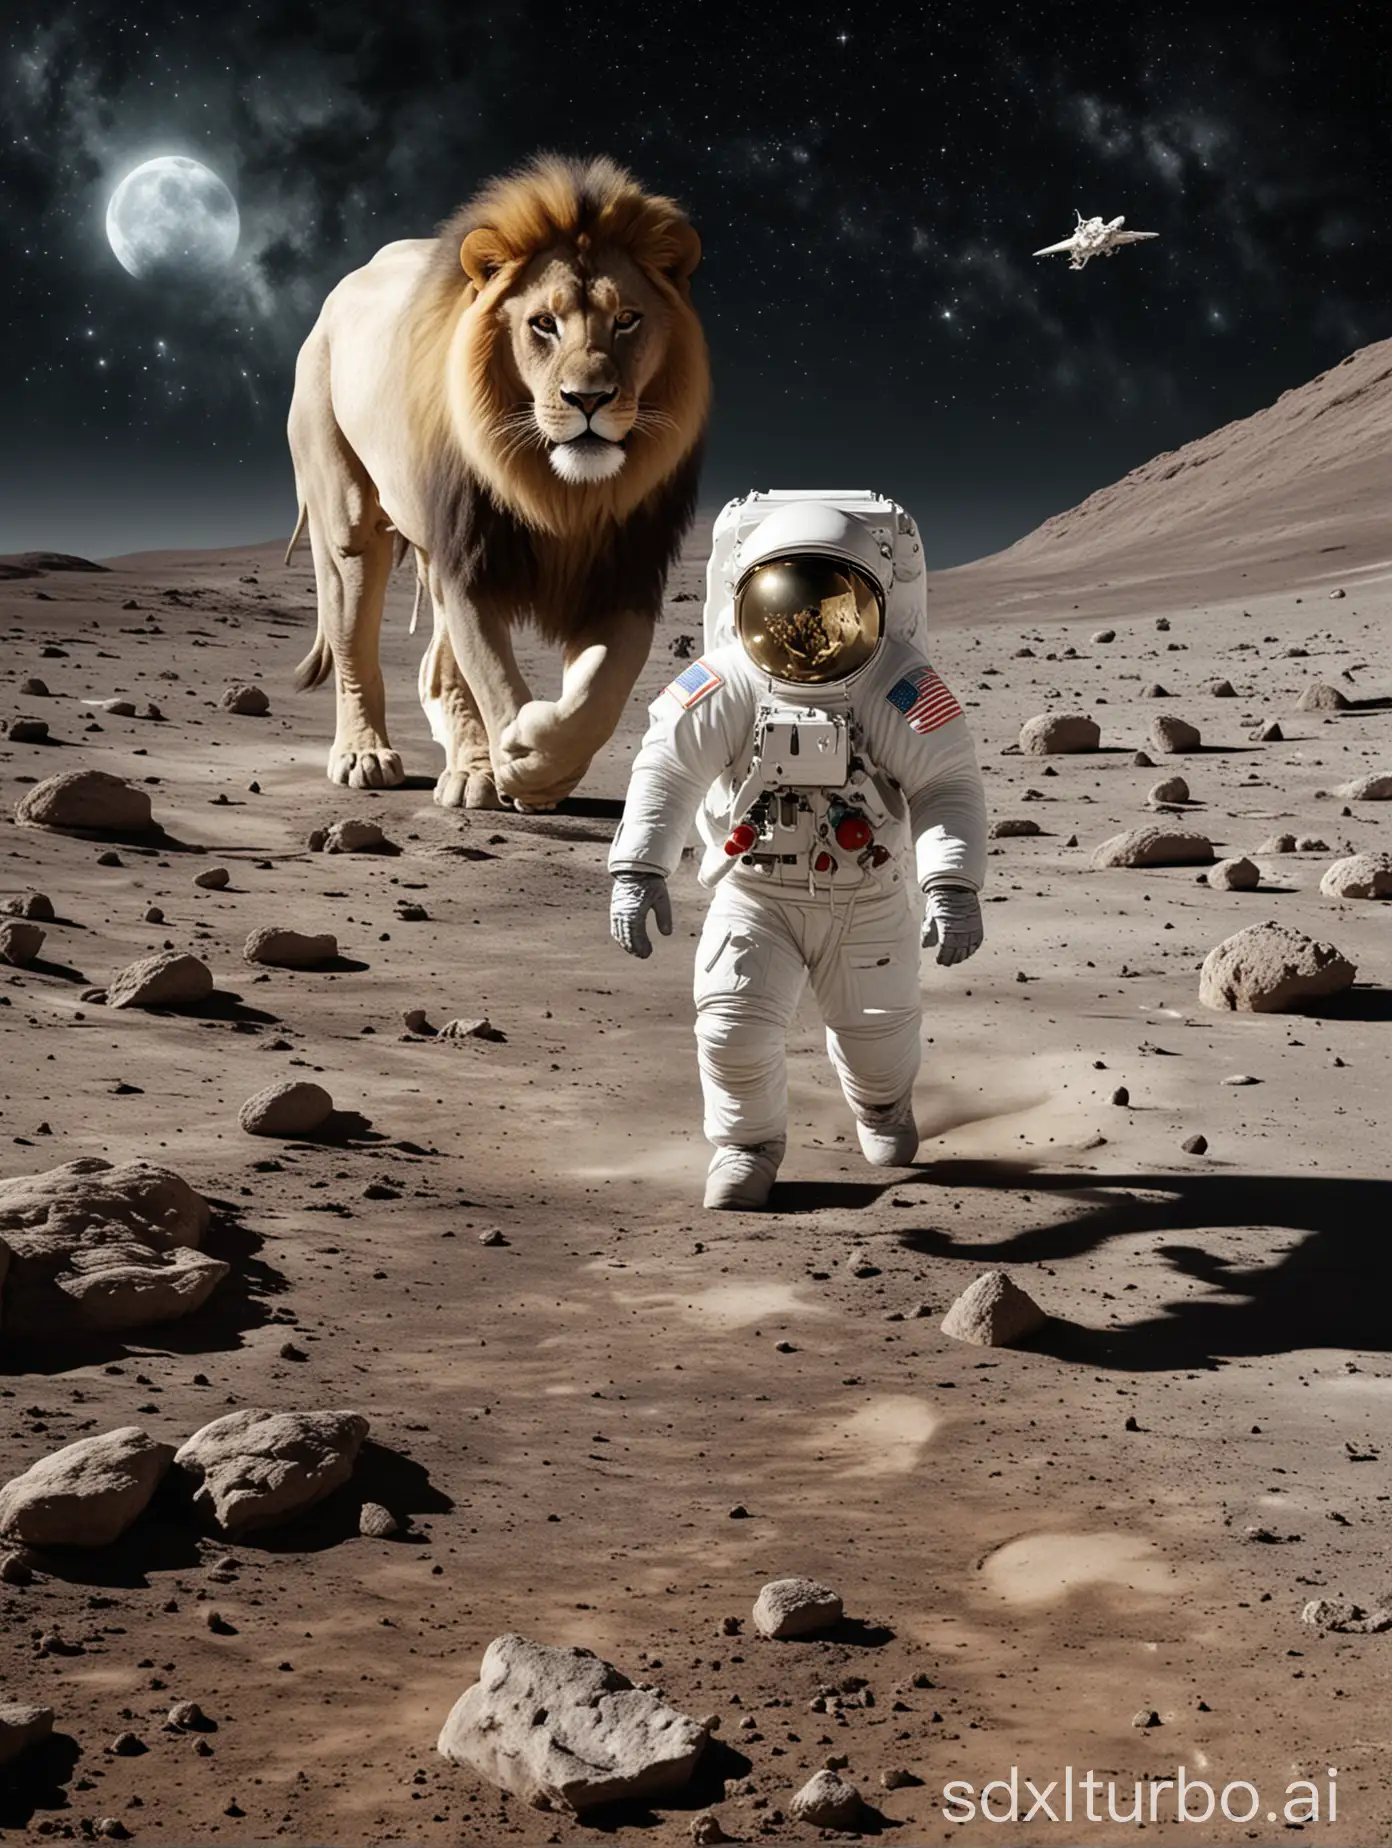 Astronauts-Walking-on-the-Moon-Encountering-a-Majestic-Winged-Lion